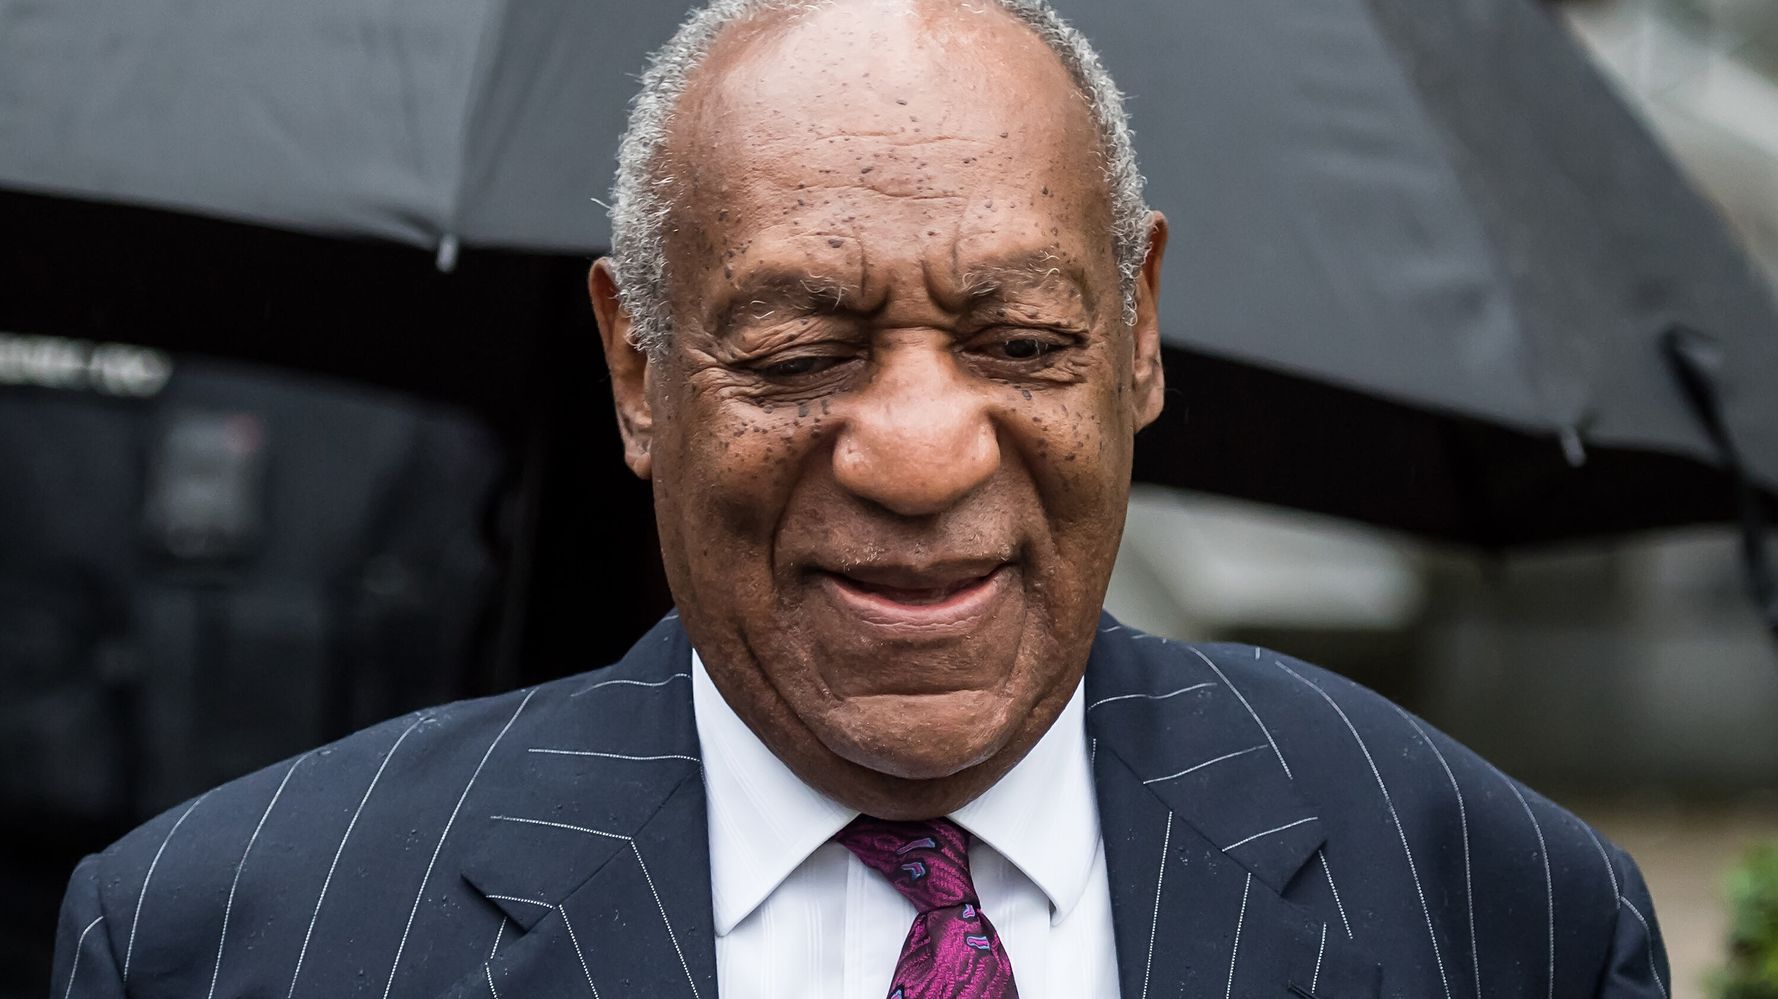 Bill Cosby Released From Prison After Court Overturns His Conviction